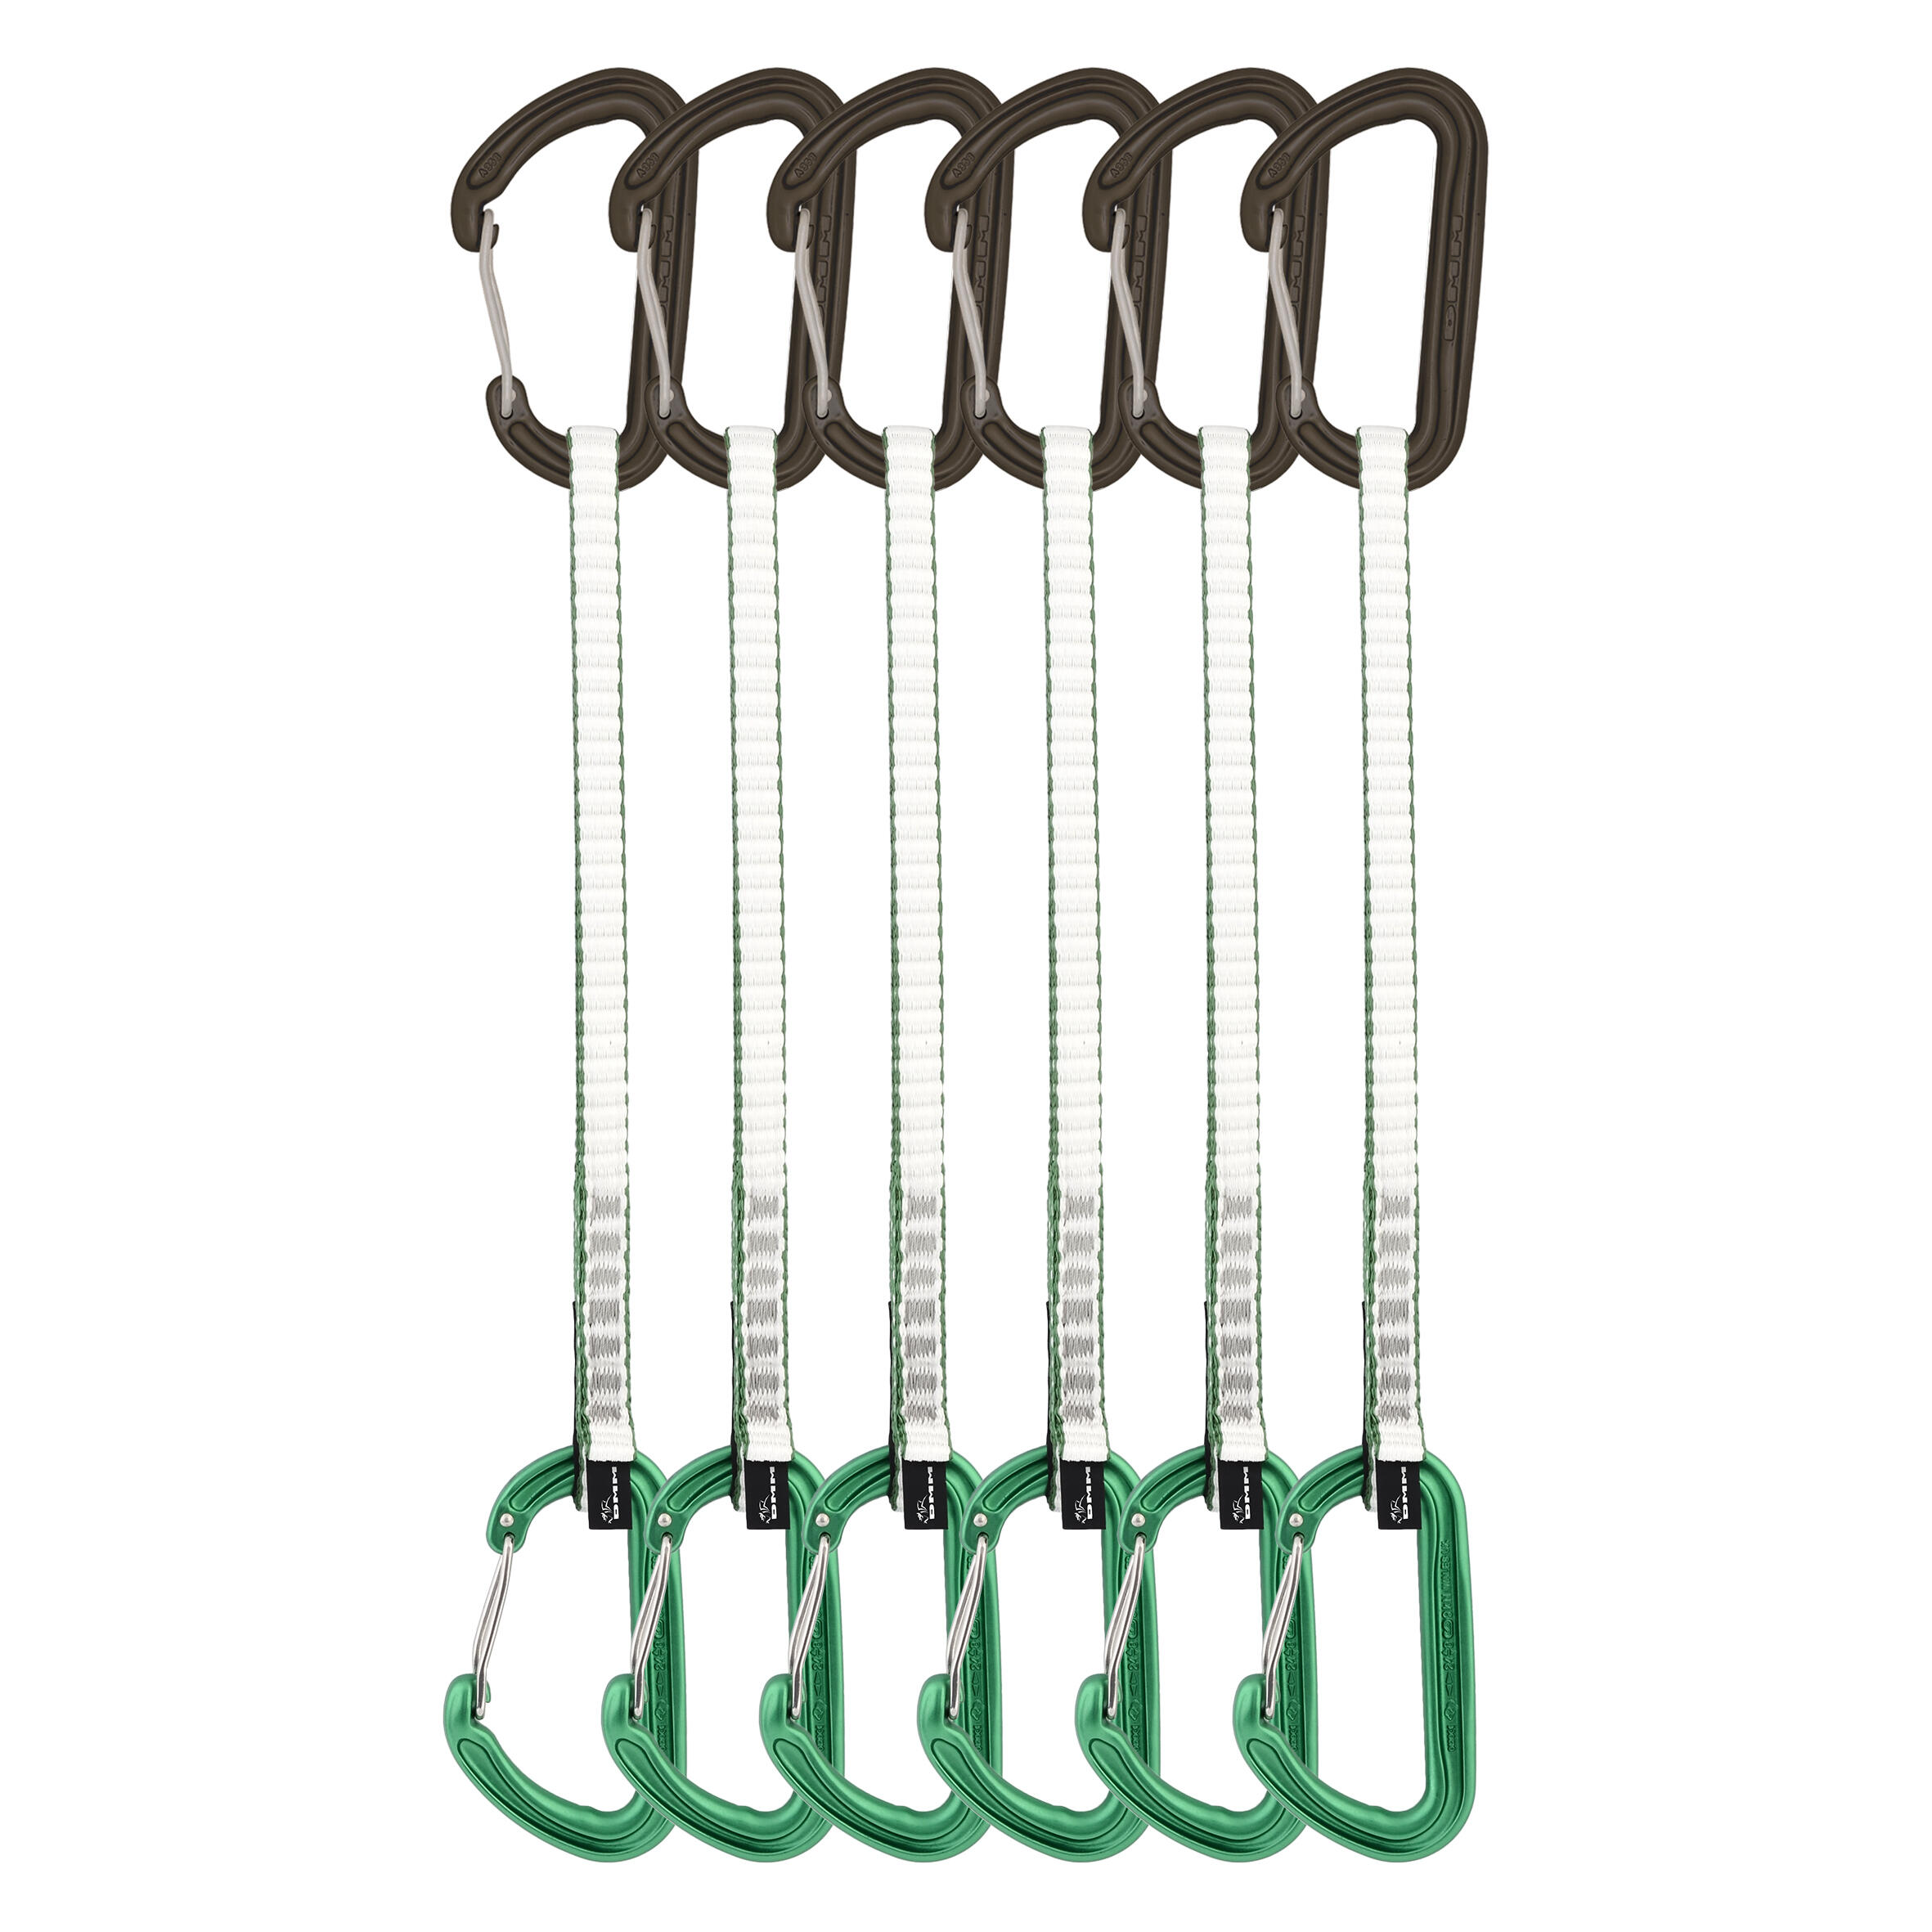 Spectre Quickdraw 25cm - Green - 6 Pack 1/3